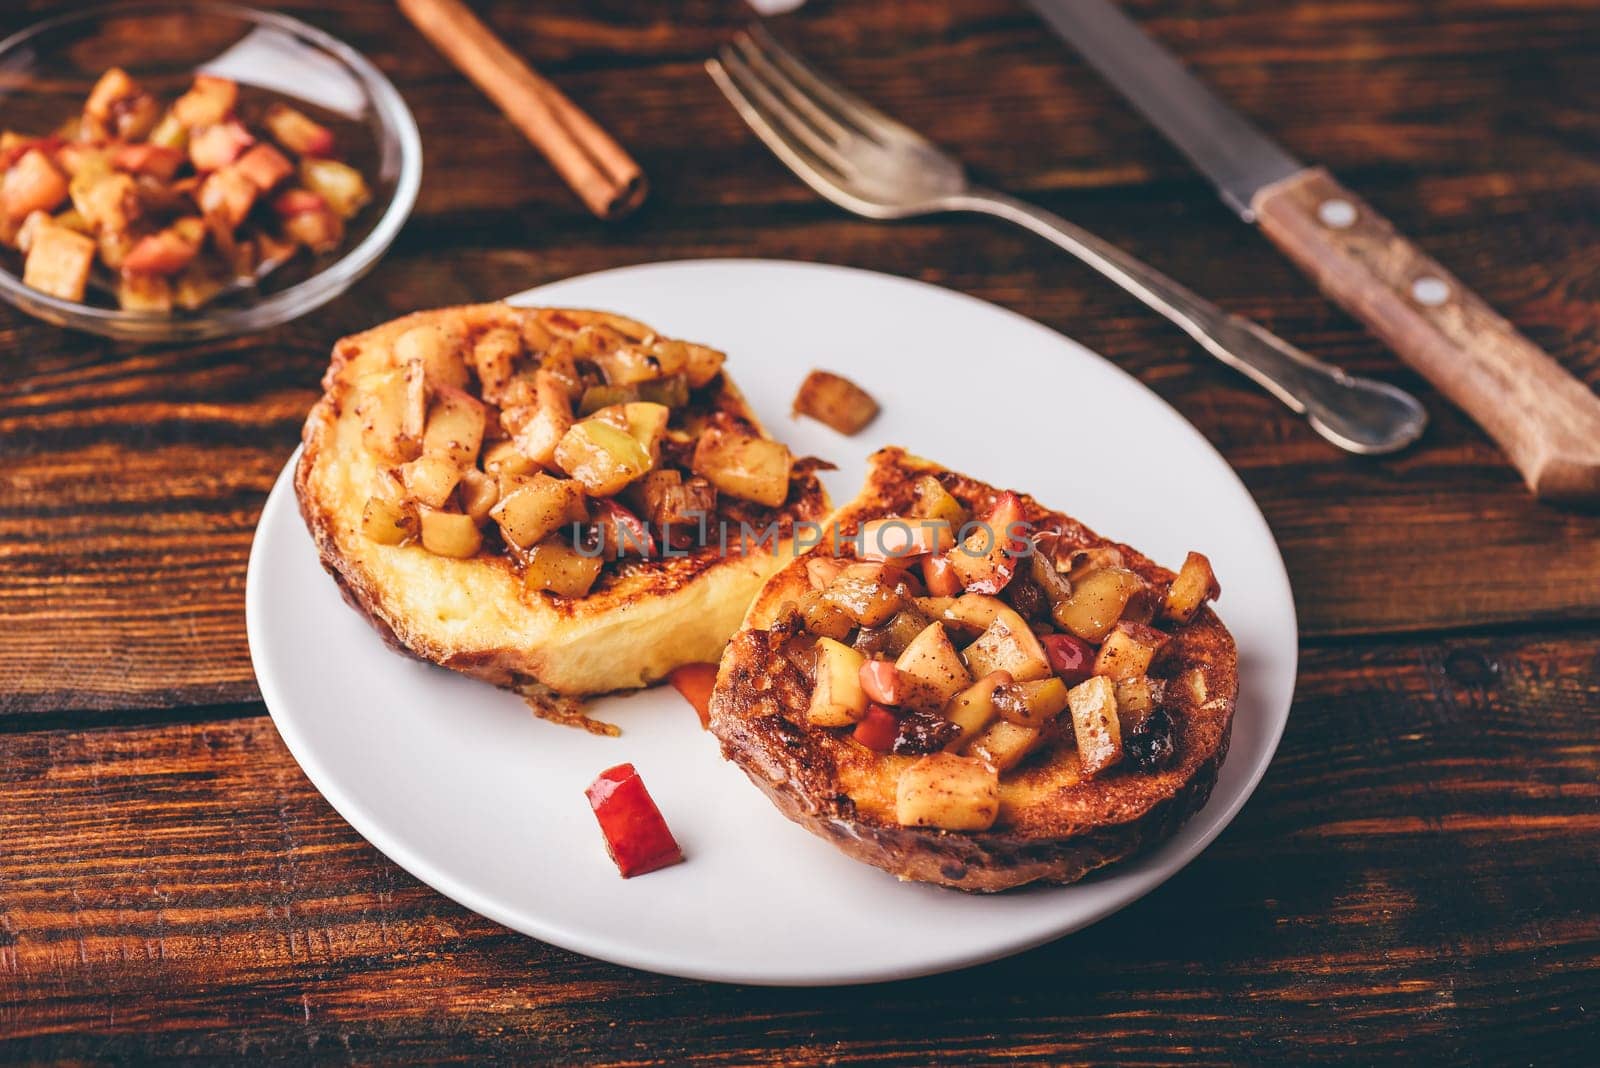 French toasts with caramelized apple with cinnamon